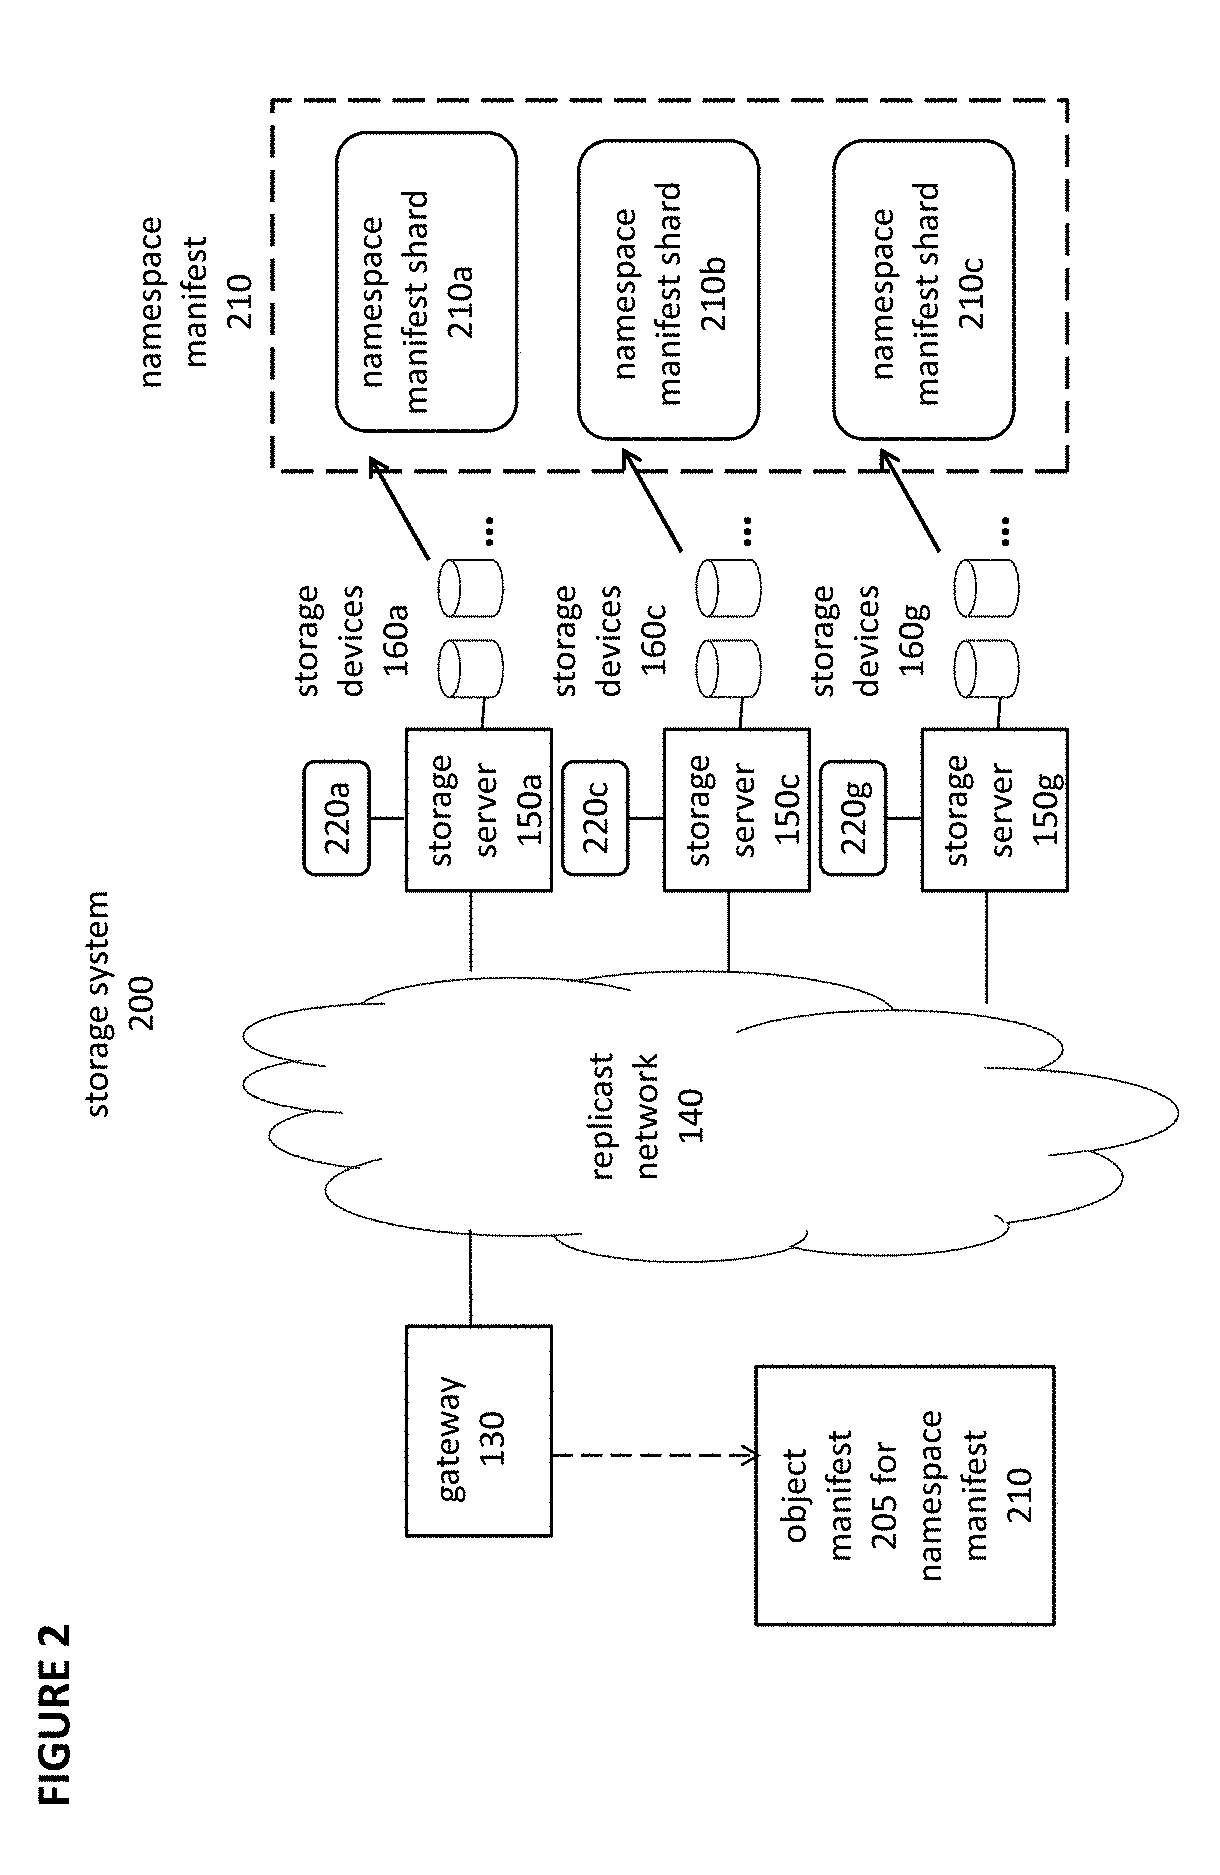 Object storage system with local transaction logs, a distributed namespace, and optimized support for user directories